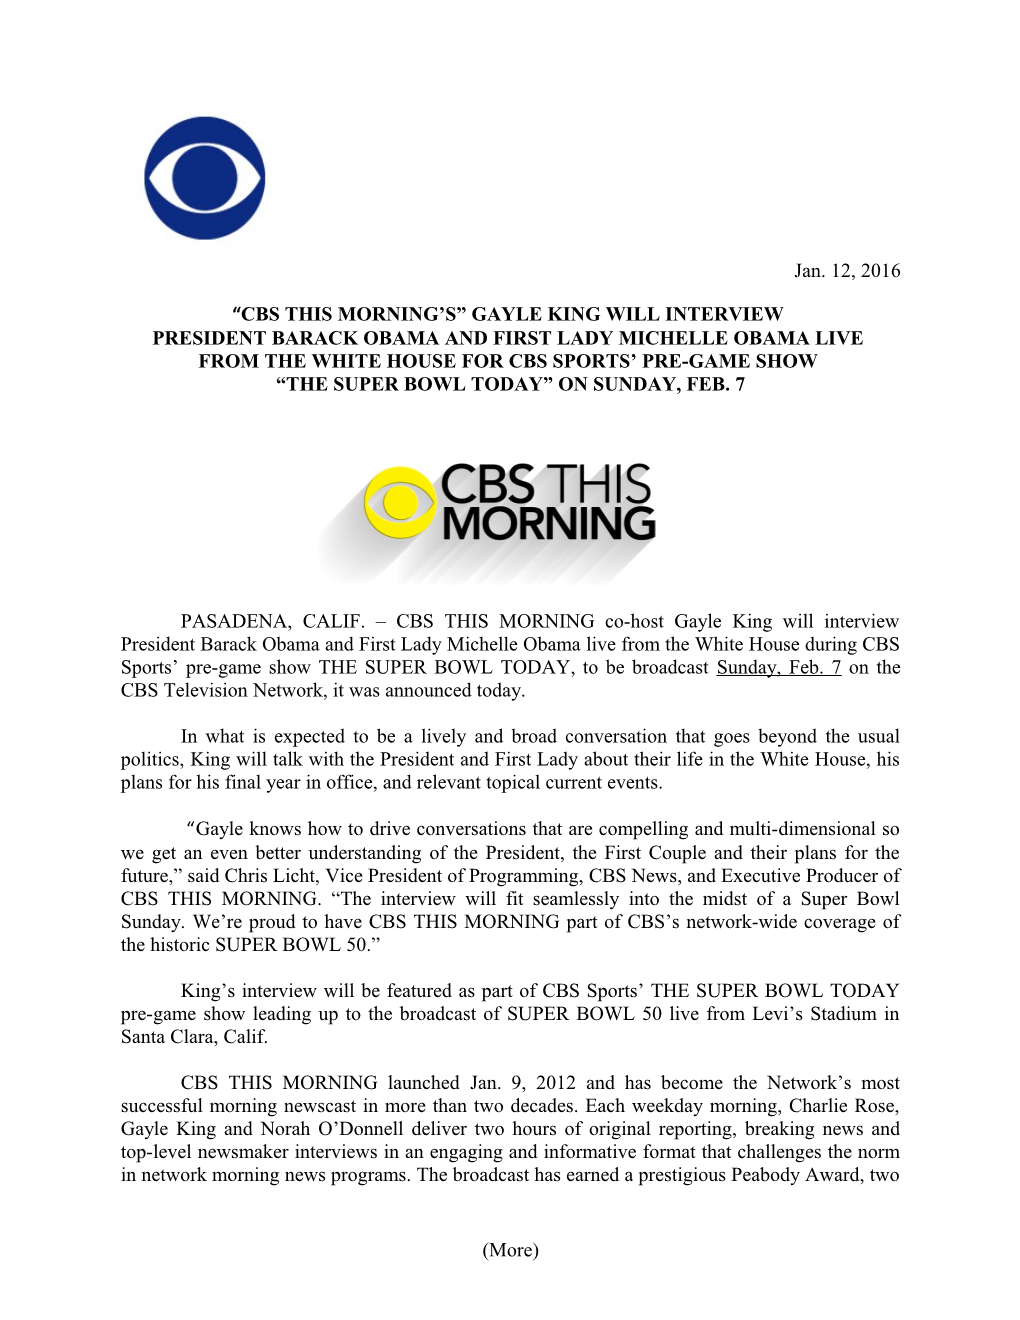 Cbs This Morning S Gayle King Will Interview President Barack Obama and First Lady Michelle